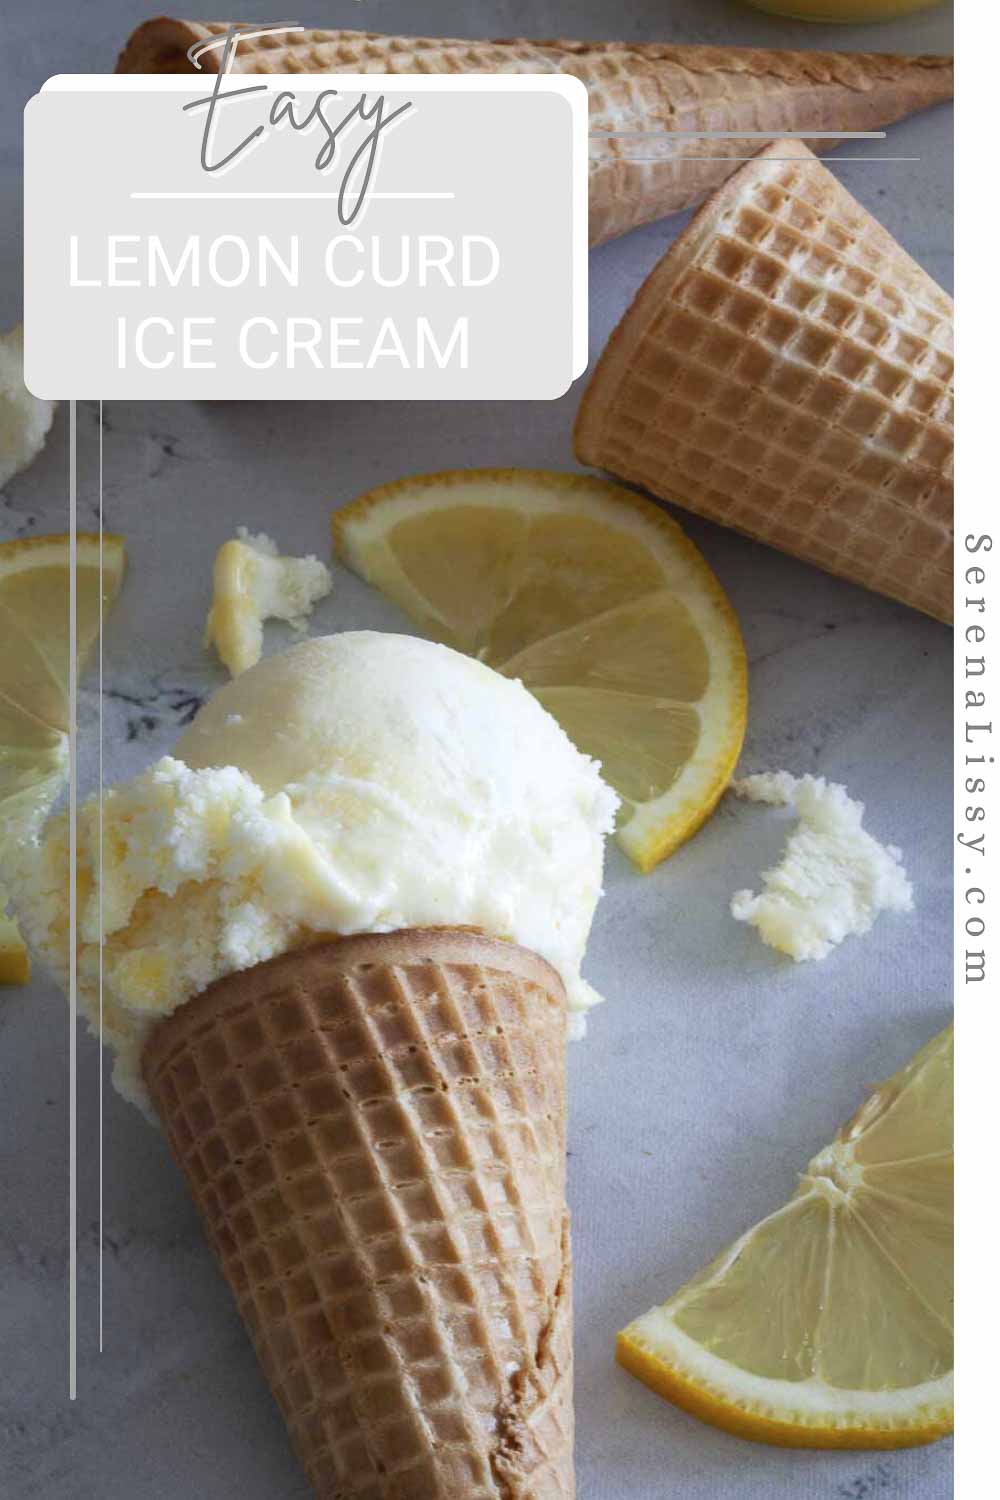 Lemon Curd Ice Cream In Cone on Table Top With Lemons